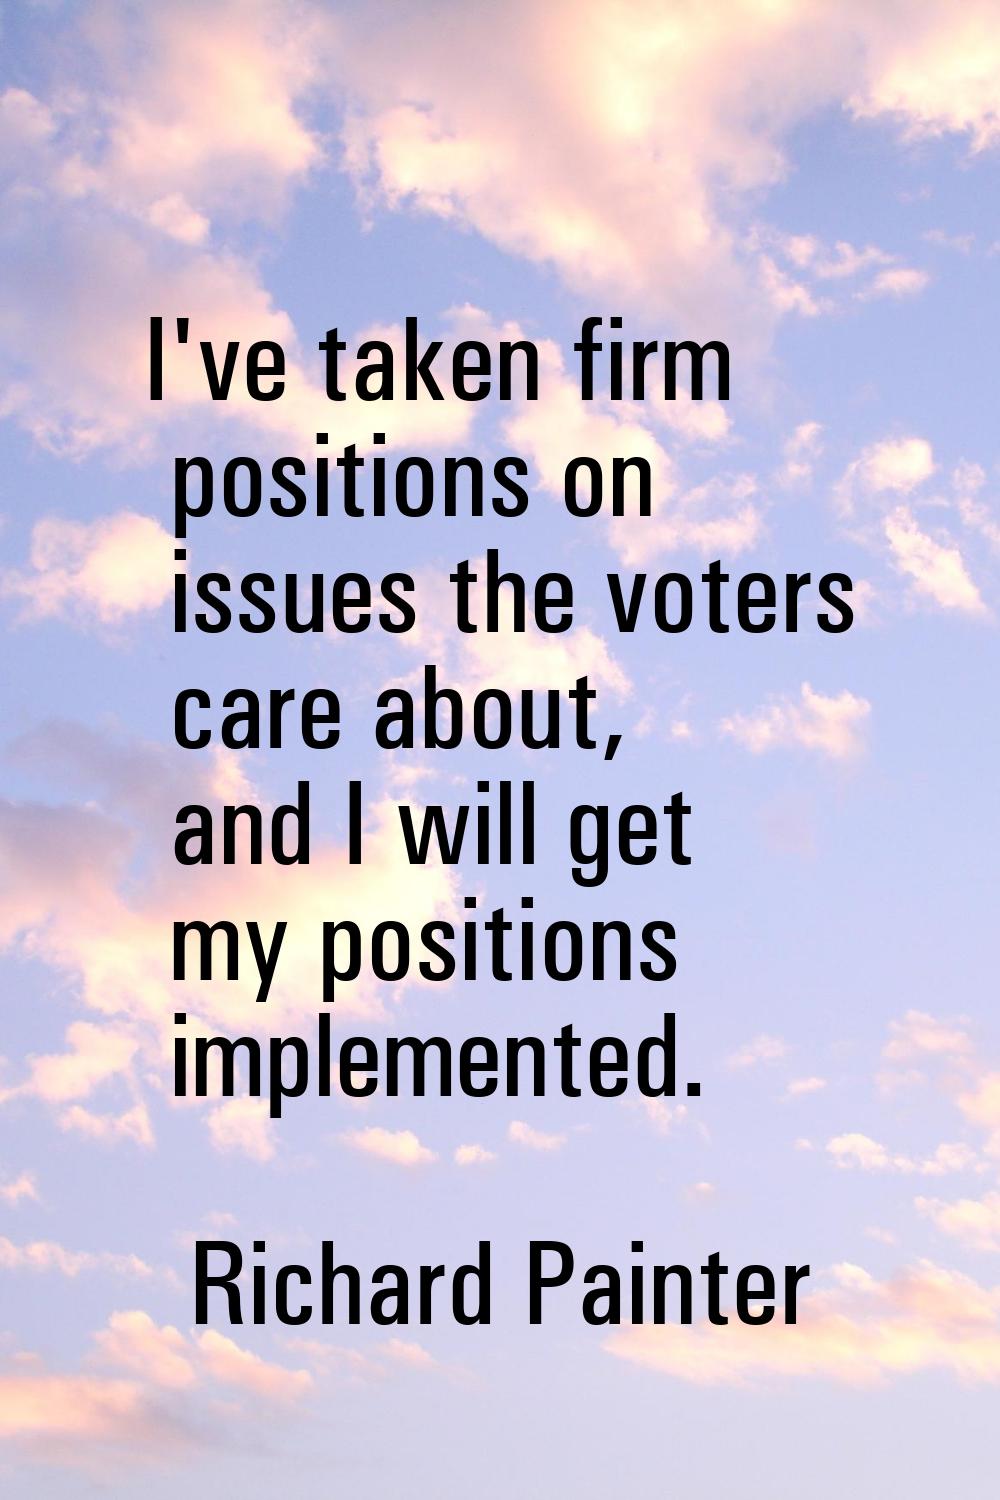 I've taken firm positions on issues the voters care about, and I will get my positions implemented.